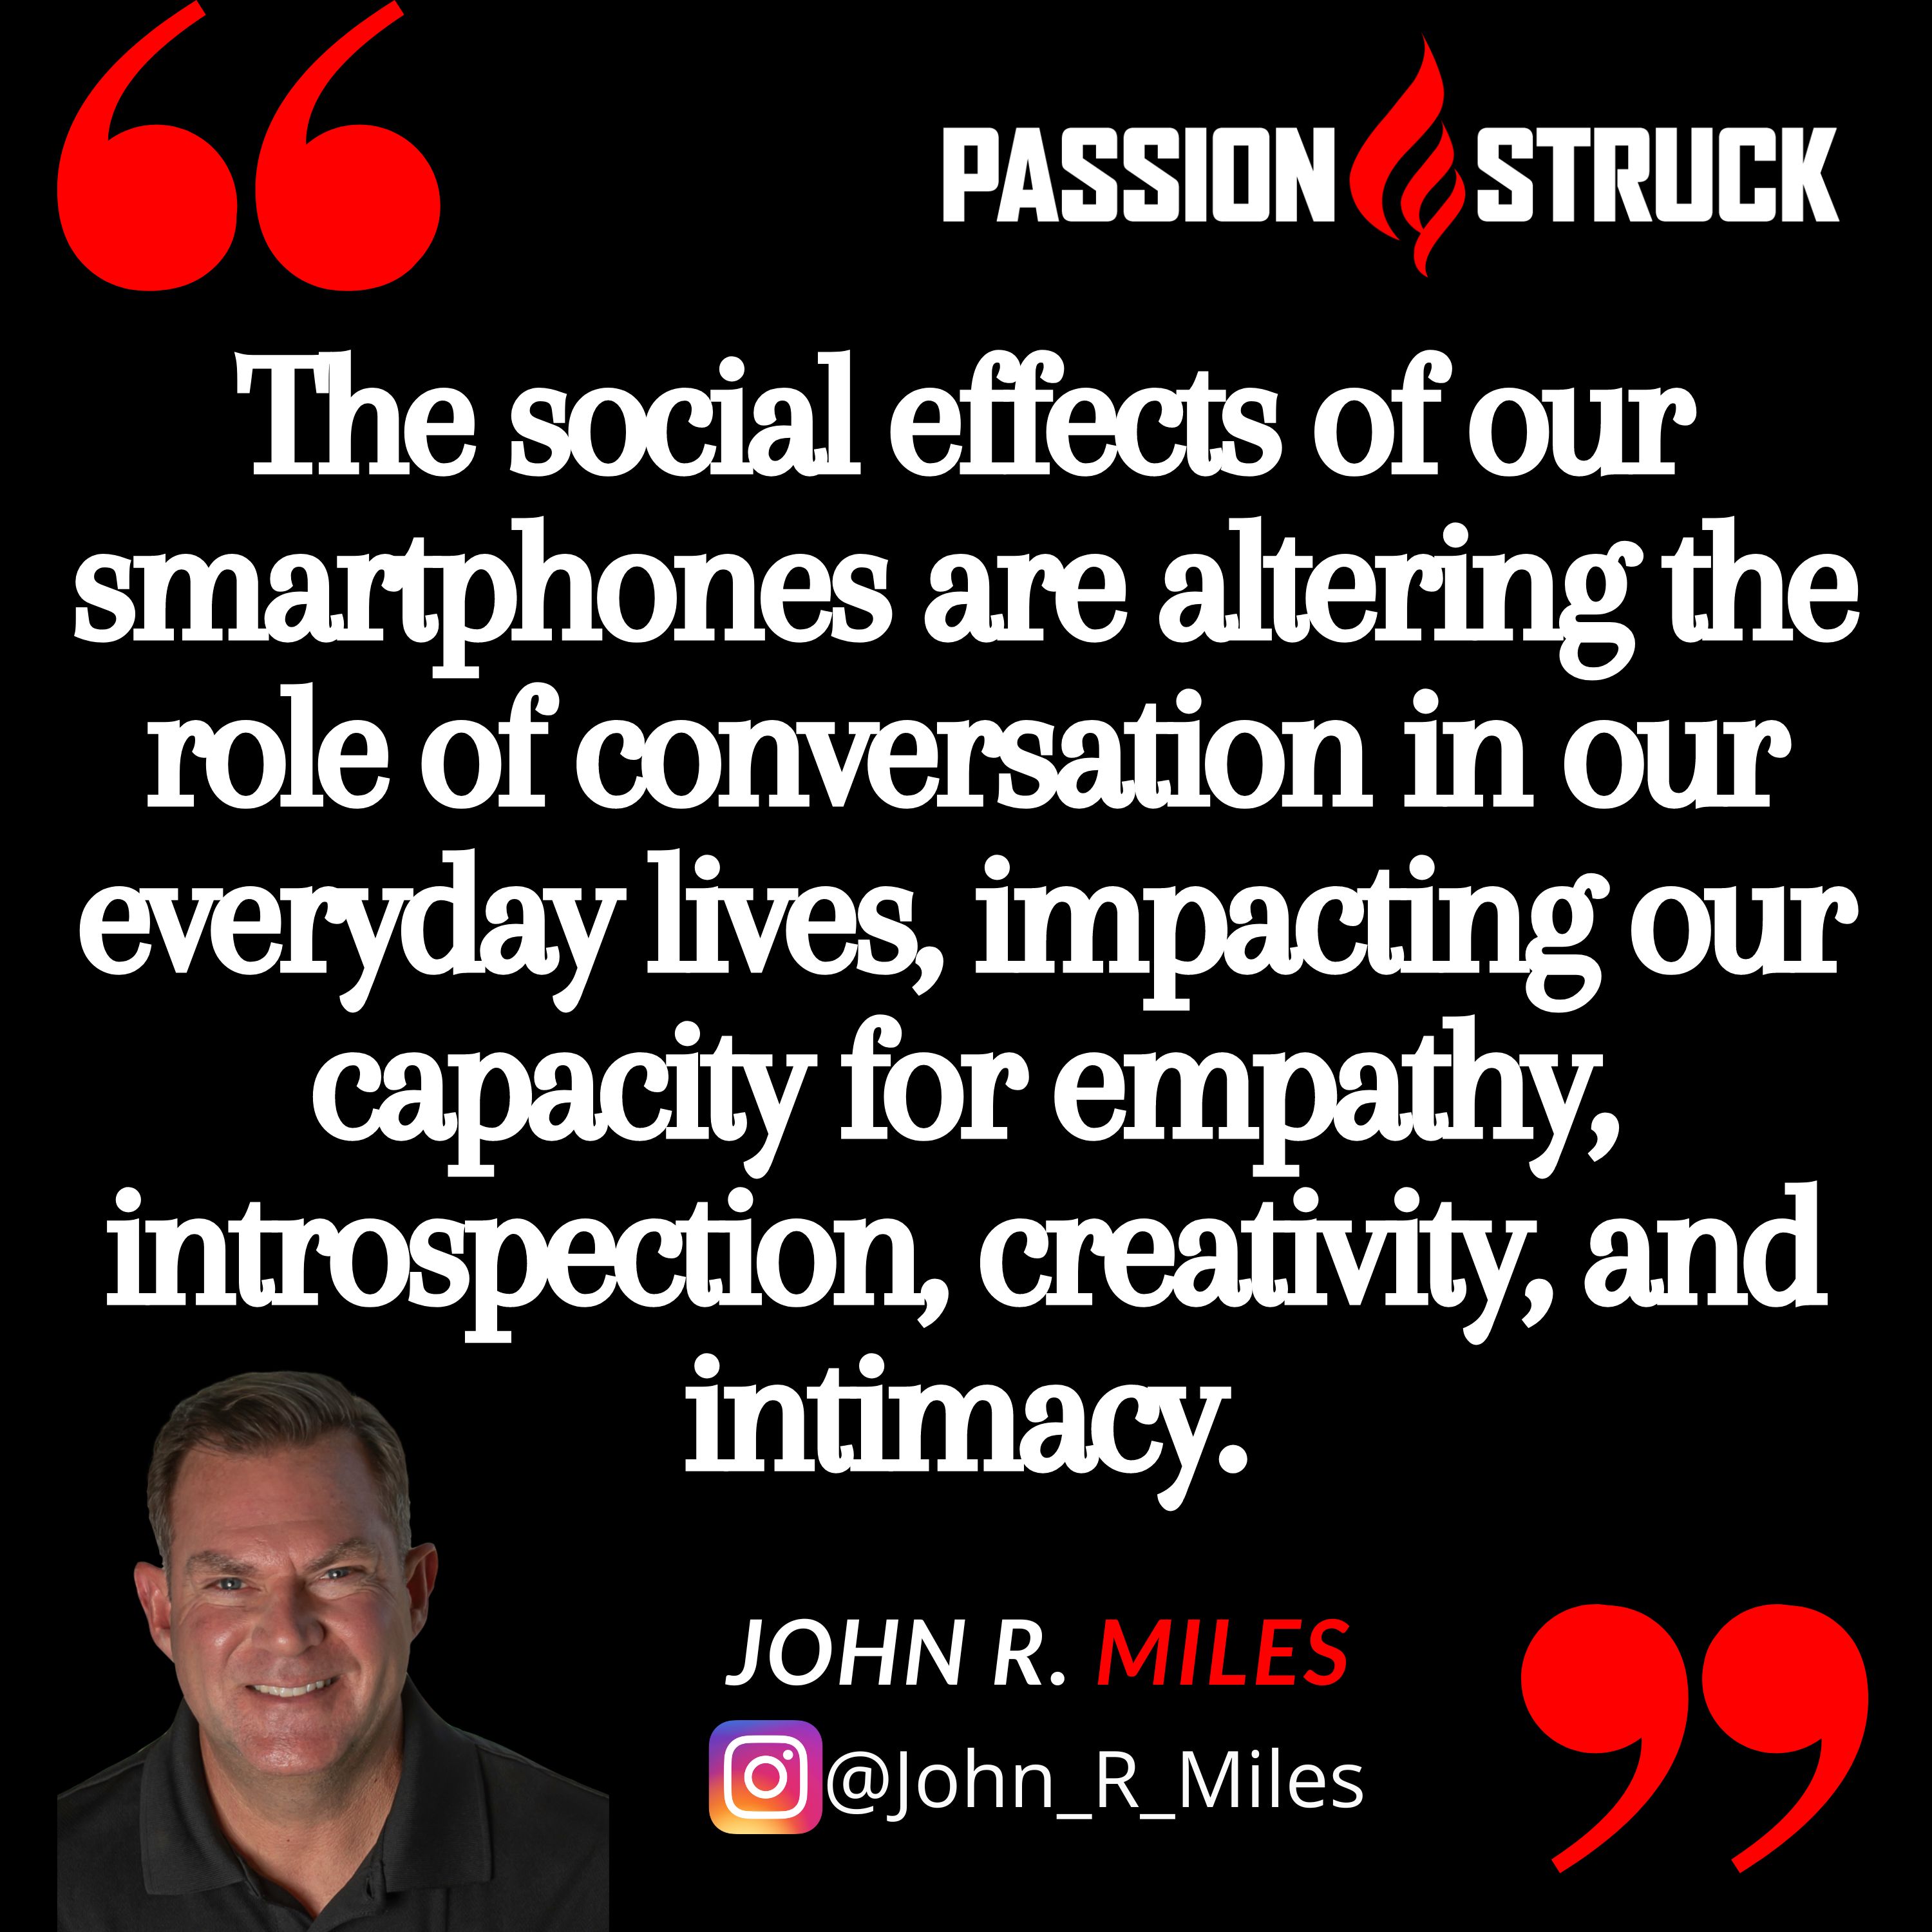 Quote by John R. Miles on digital addiction: The social effects of our smartphones are altering the role of conversation in our everyday lives, impacting our capacity for empathy, introspection, creativity, and intimacy.